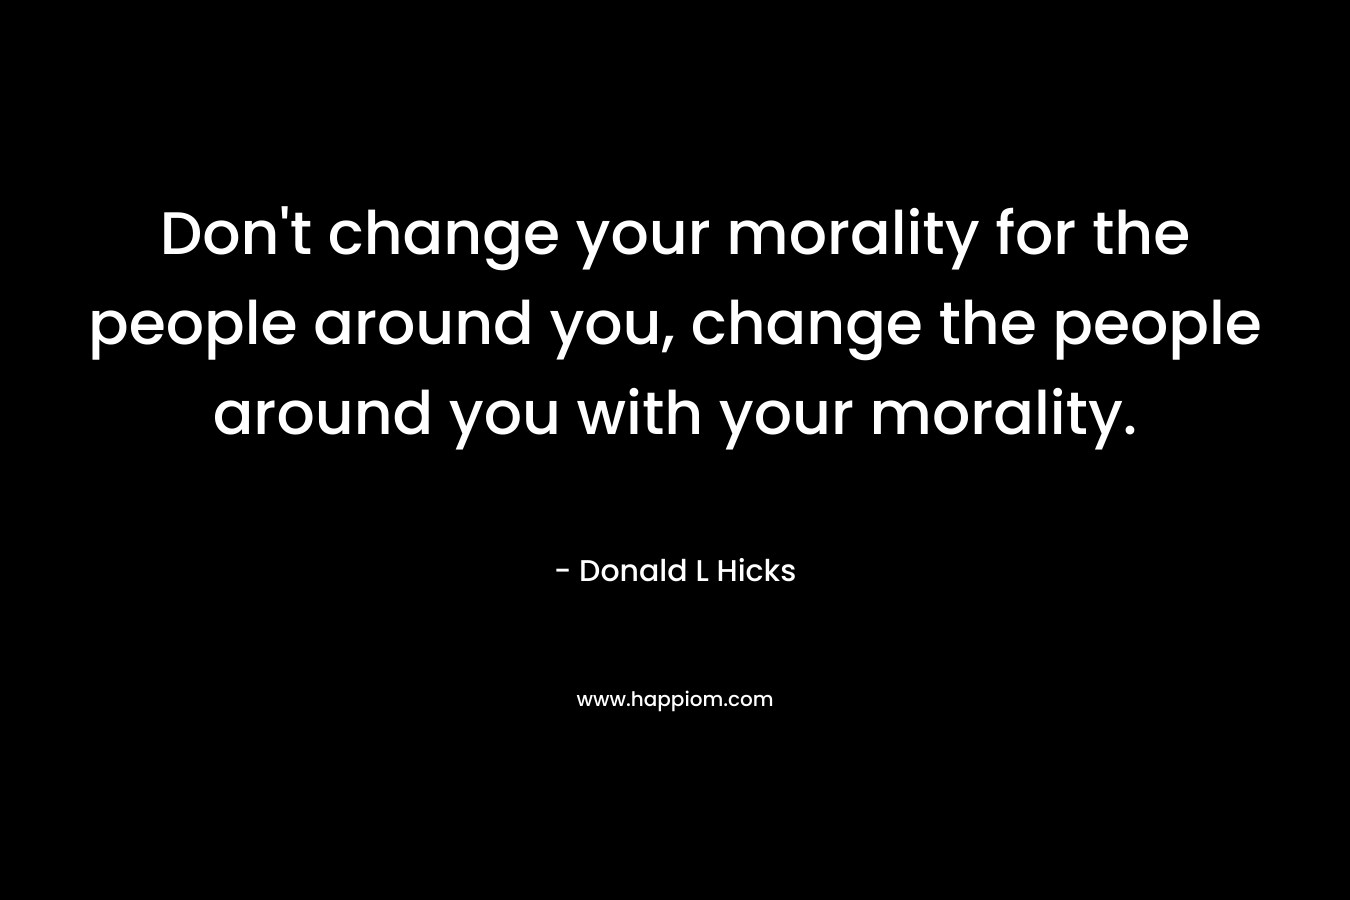 Don't change your morality for the people around you, change the people around you with your morality.